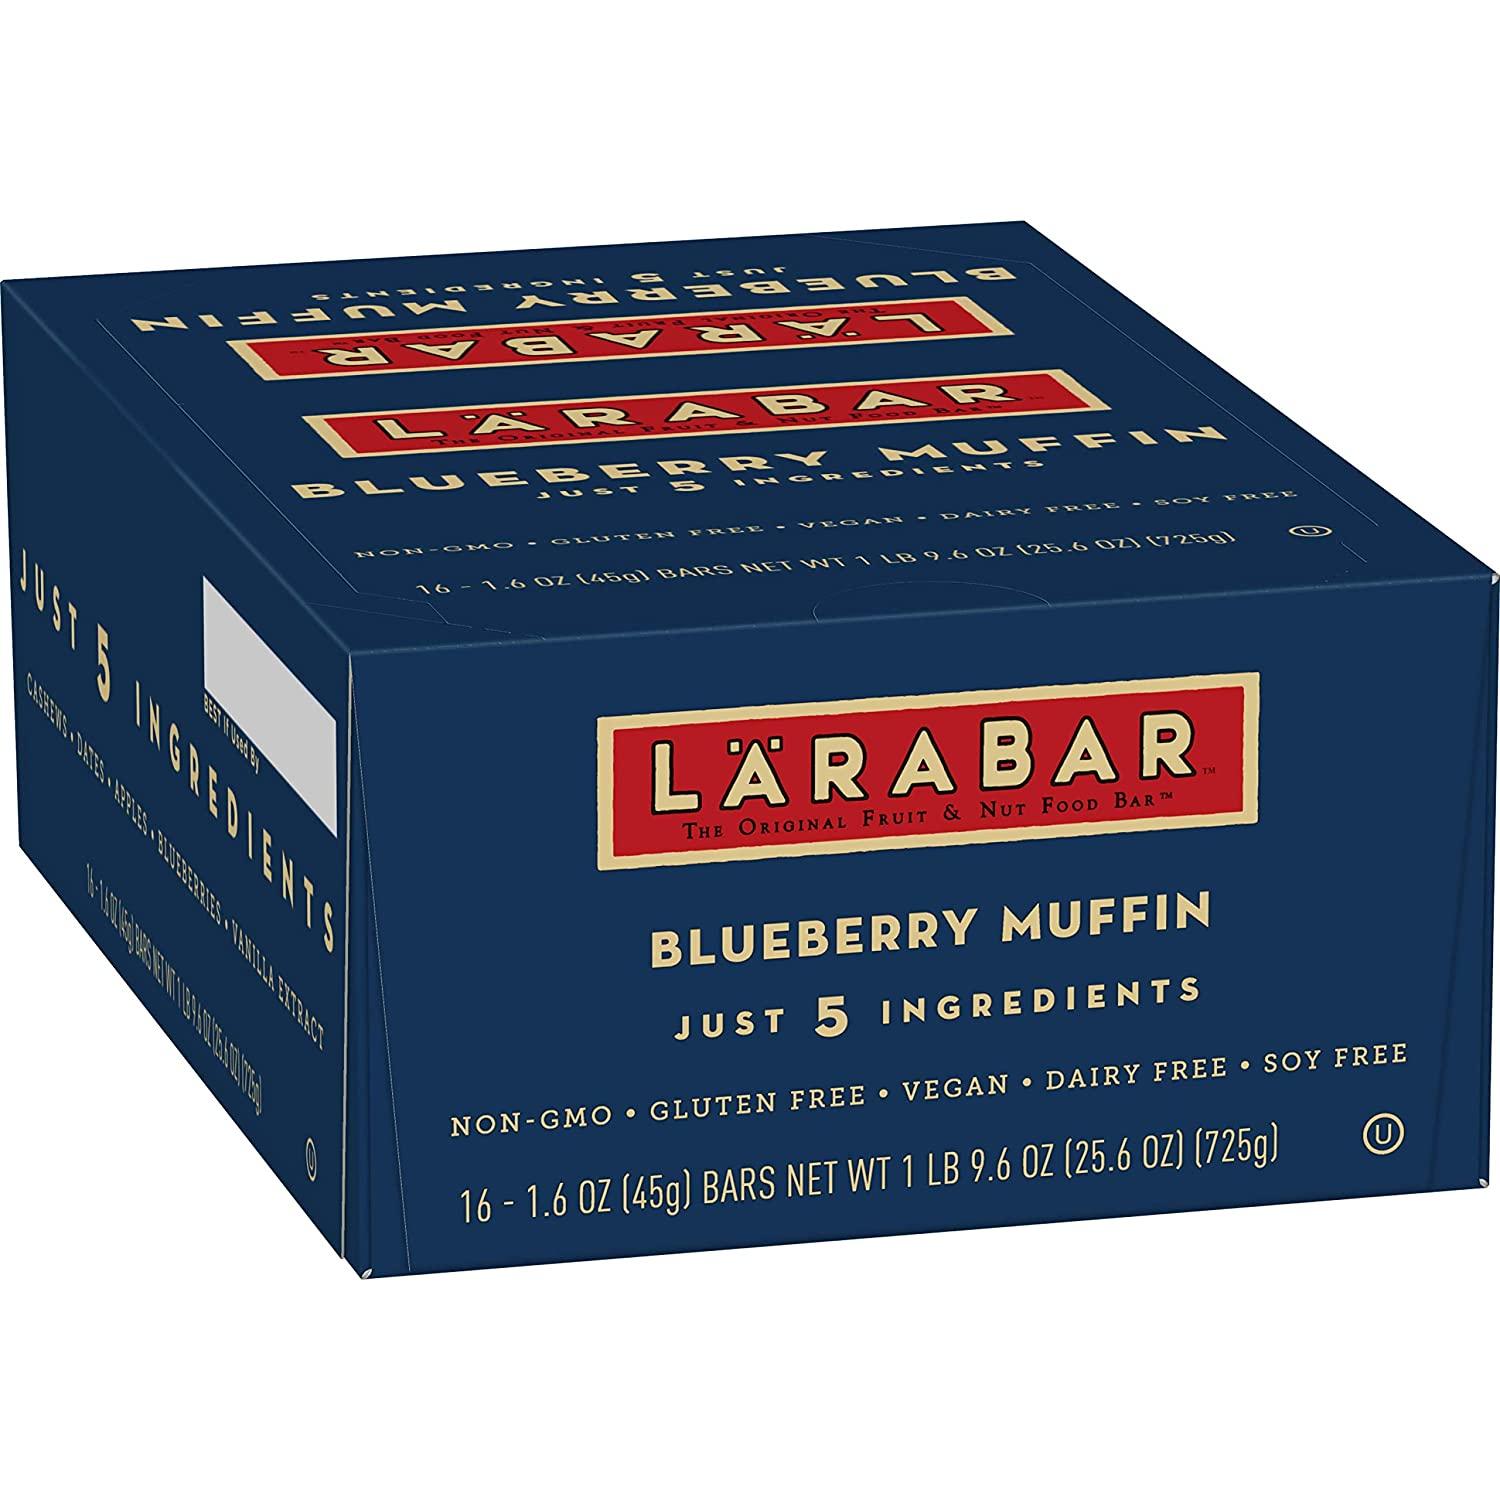 16 Larabar Fruit and Nut Bars Blueberry Muffin for $4.37 Shipped